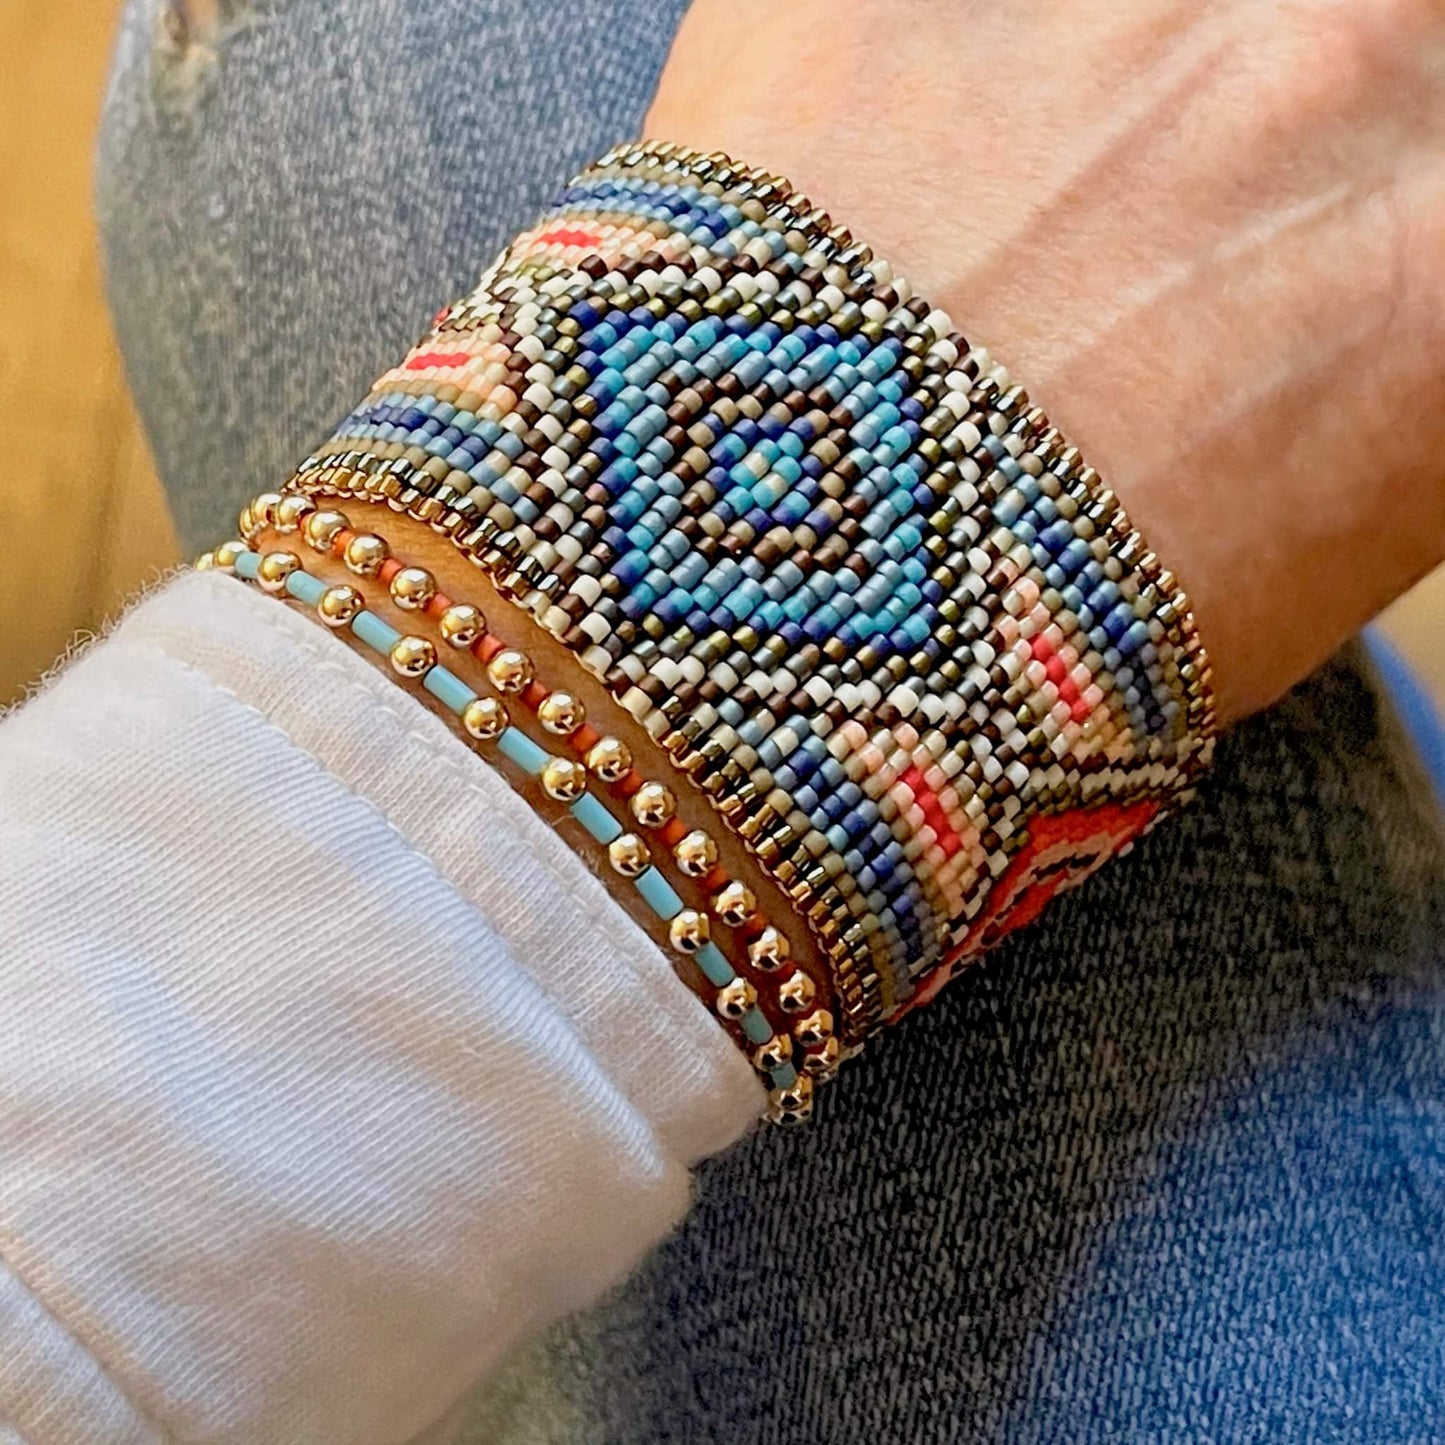 Hand woven peyote beaded bracelet in turquoise & coral diamond pattern, stacked with gold ball & seed bead stretch bracelets.